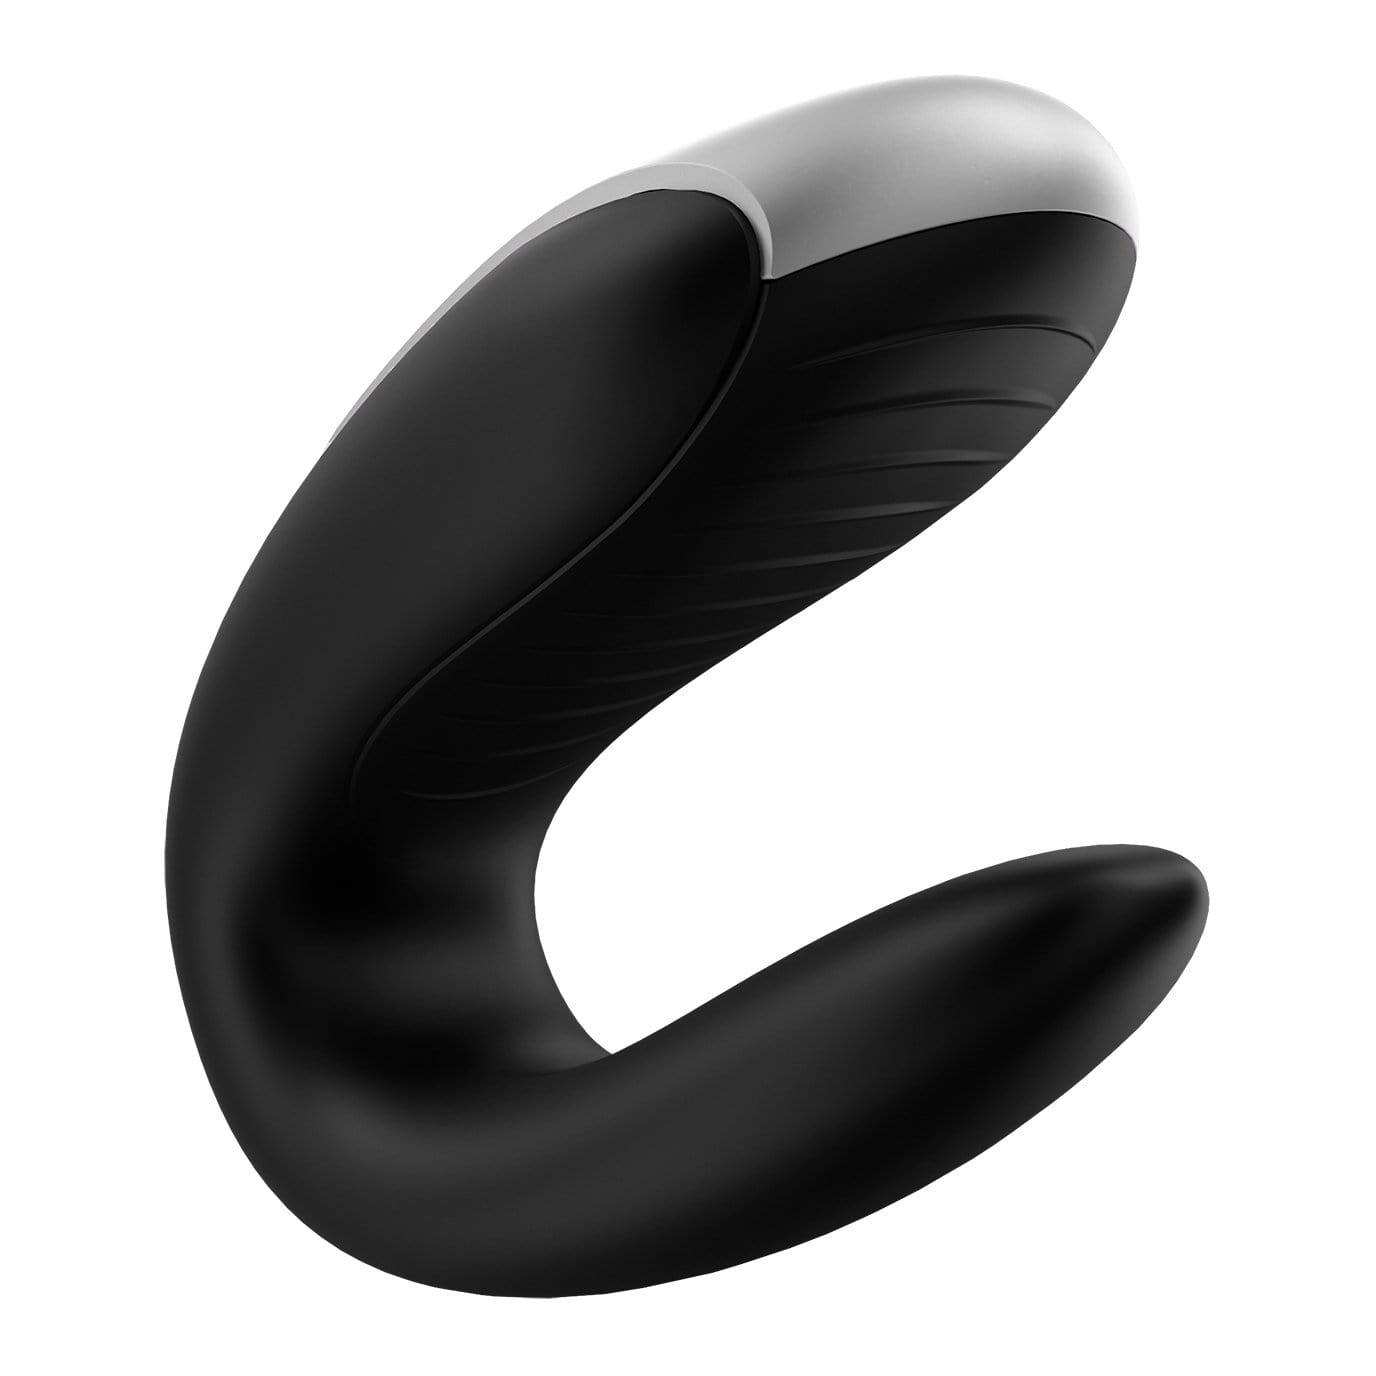 Satisfyer - Double Fun App-Controlled Couple's Vibrator with Remote Control (Black) Remote Control Couple's Massager (Vibration) Rechargeable 4061504001692 CherryAffairs